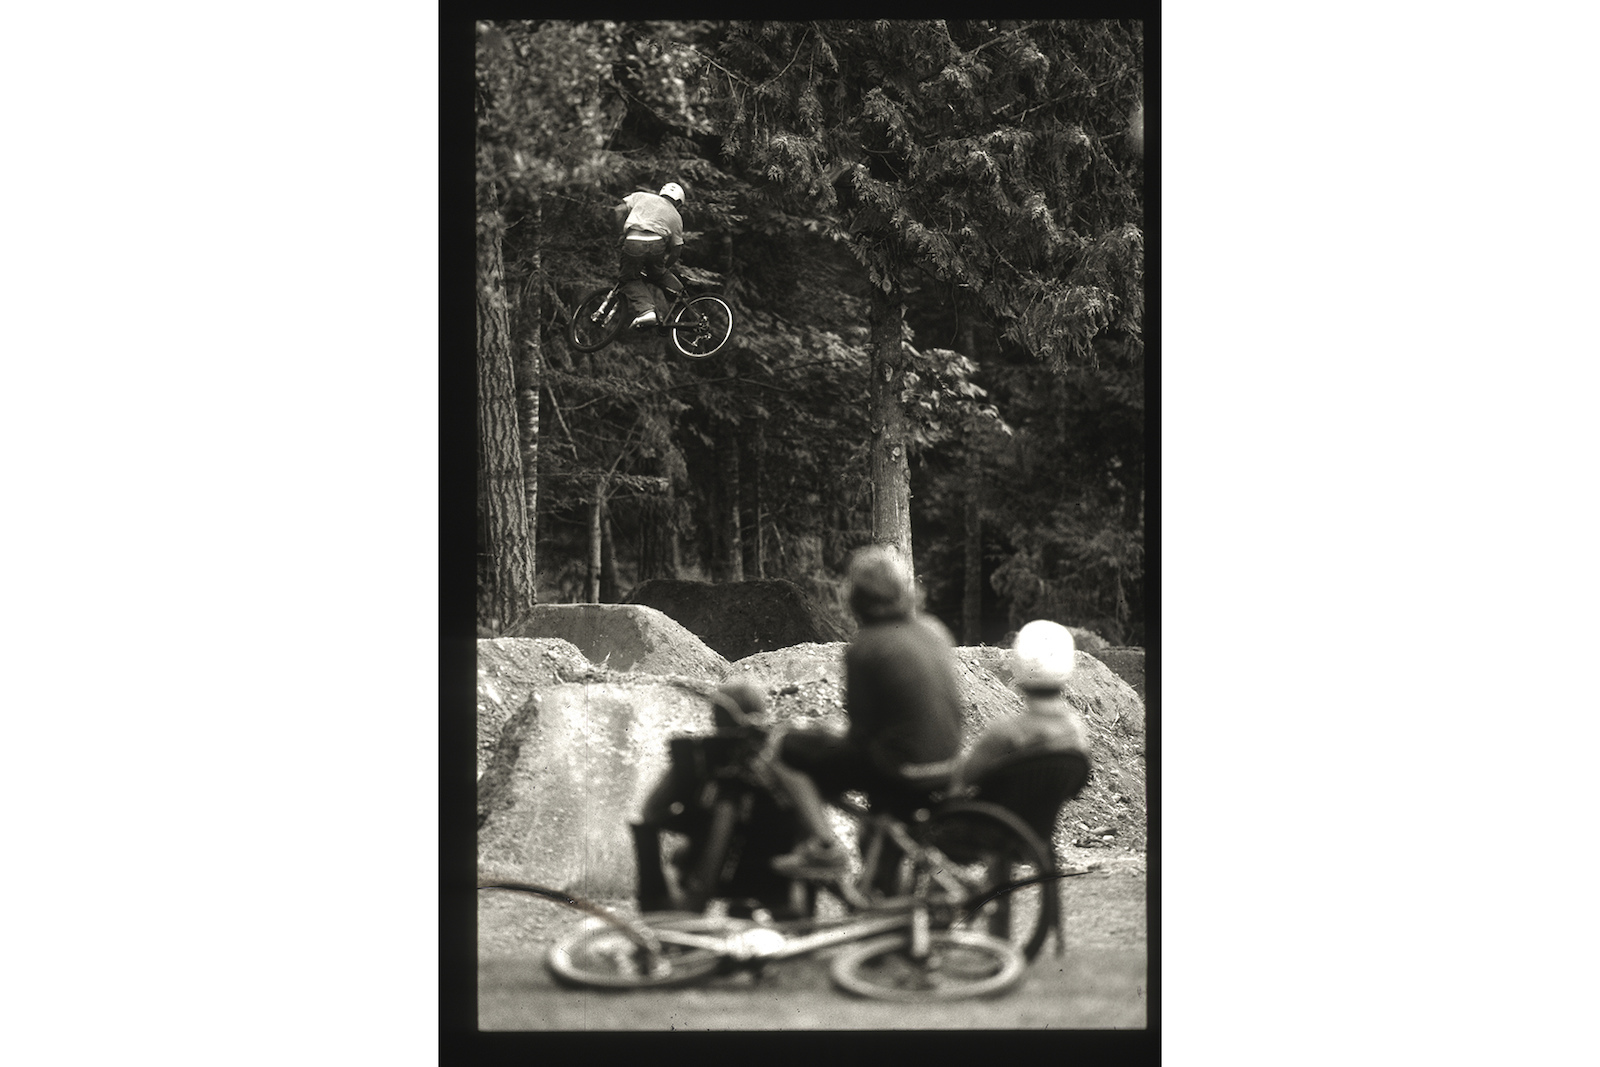 Jordie Lunn in his dad's backyard, with Cam McCaul, Jarrett Lunn, Darren Berrecloth and Ryder Kasprick in Parksville, BC, while filming for Roam in 2006